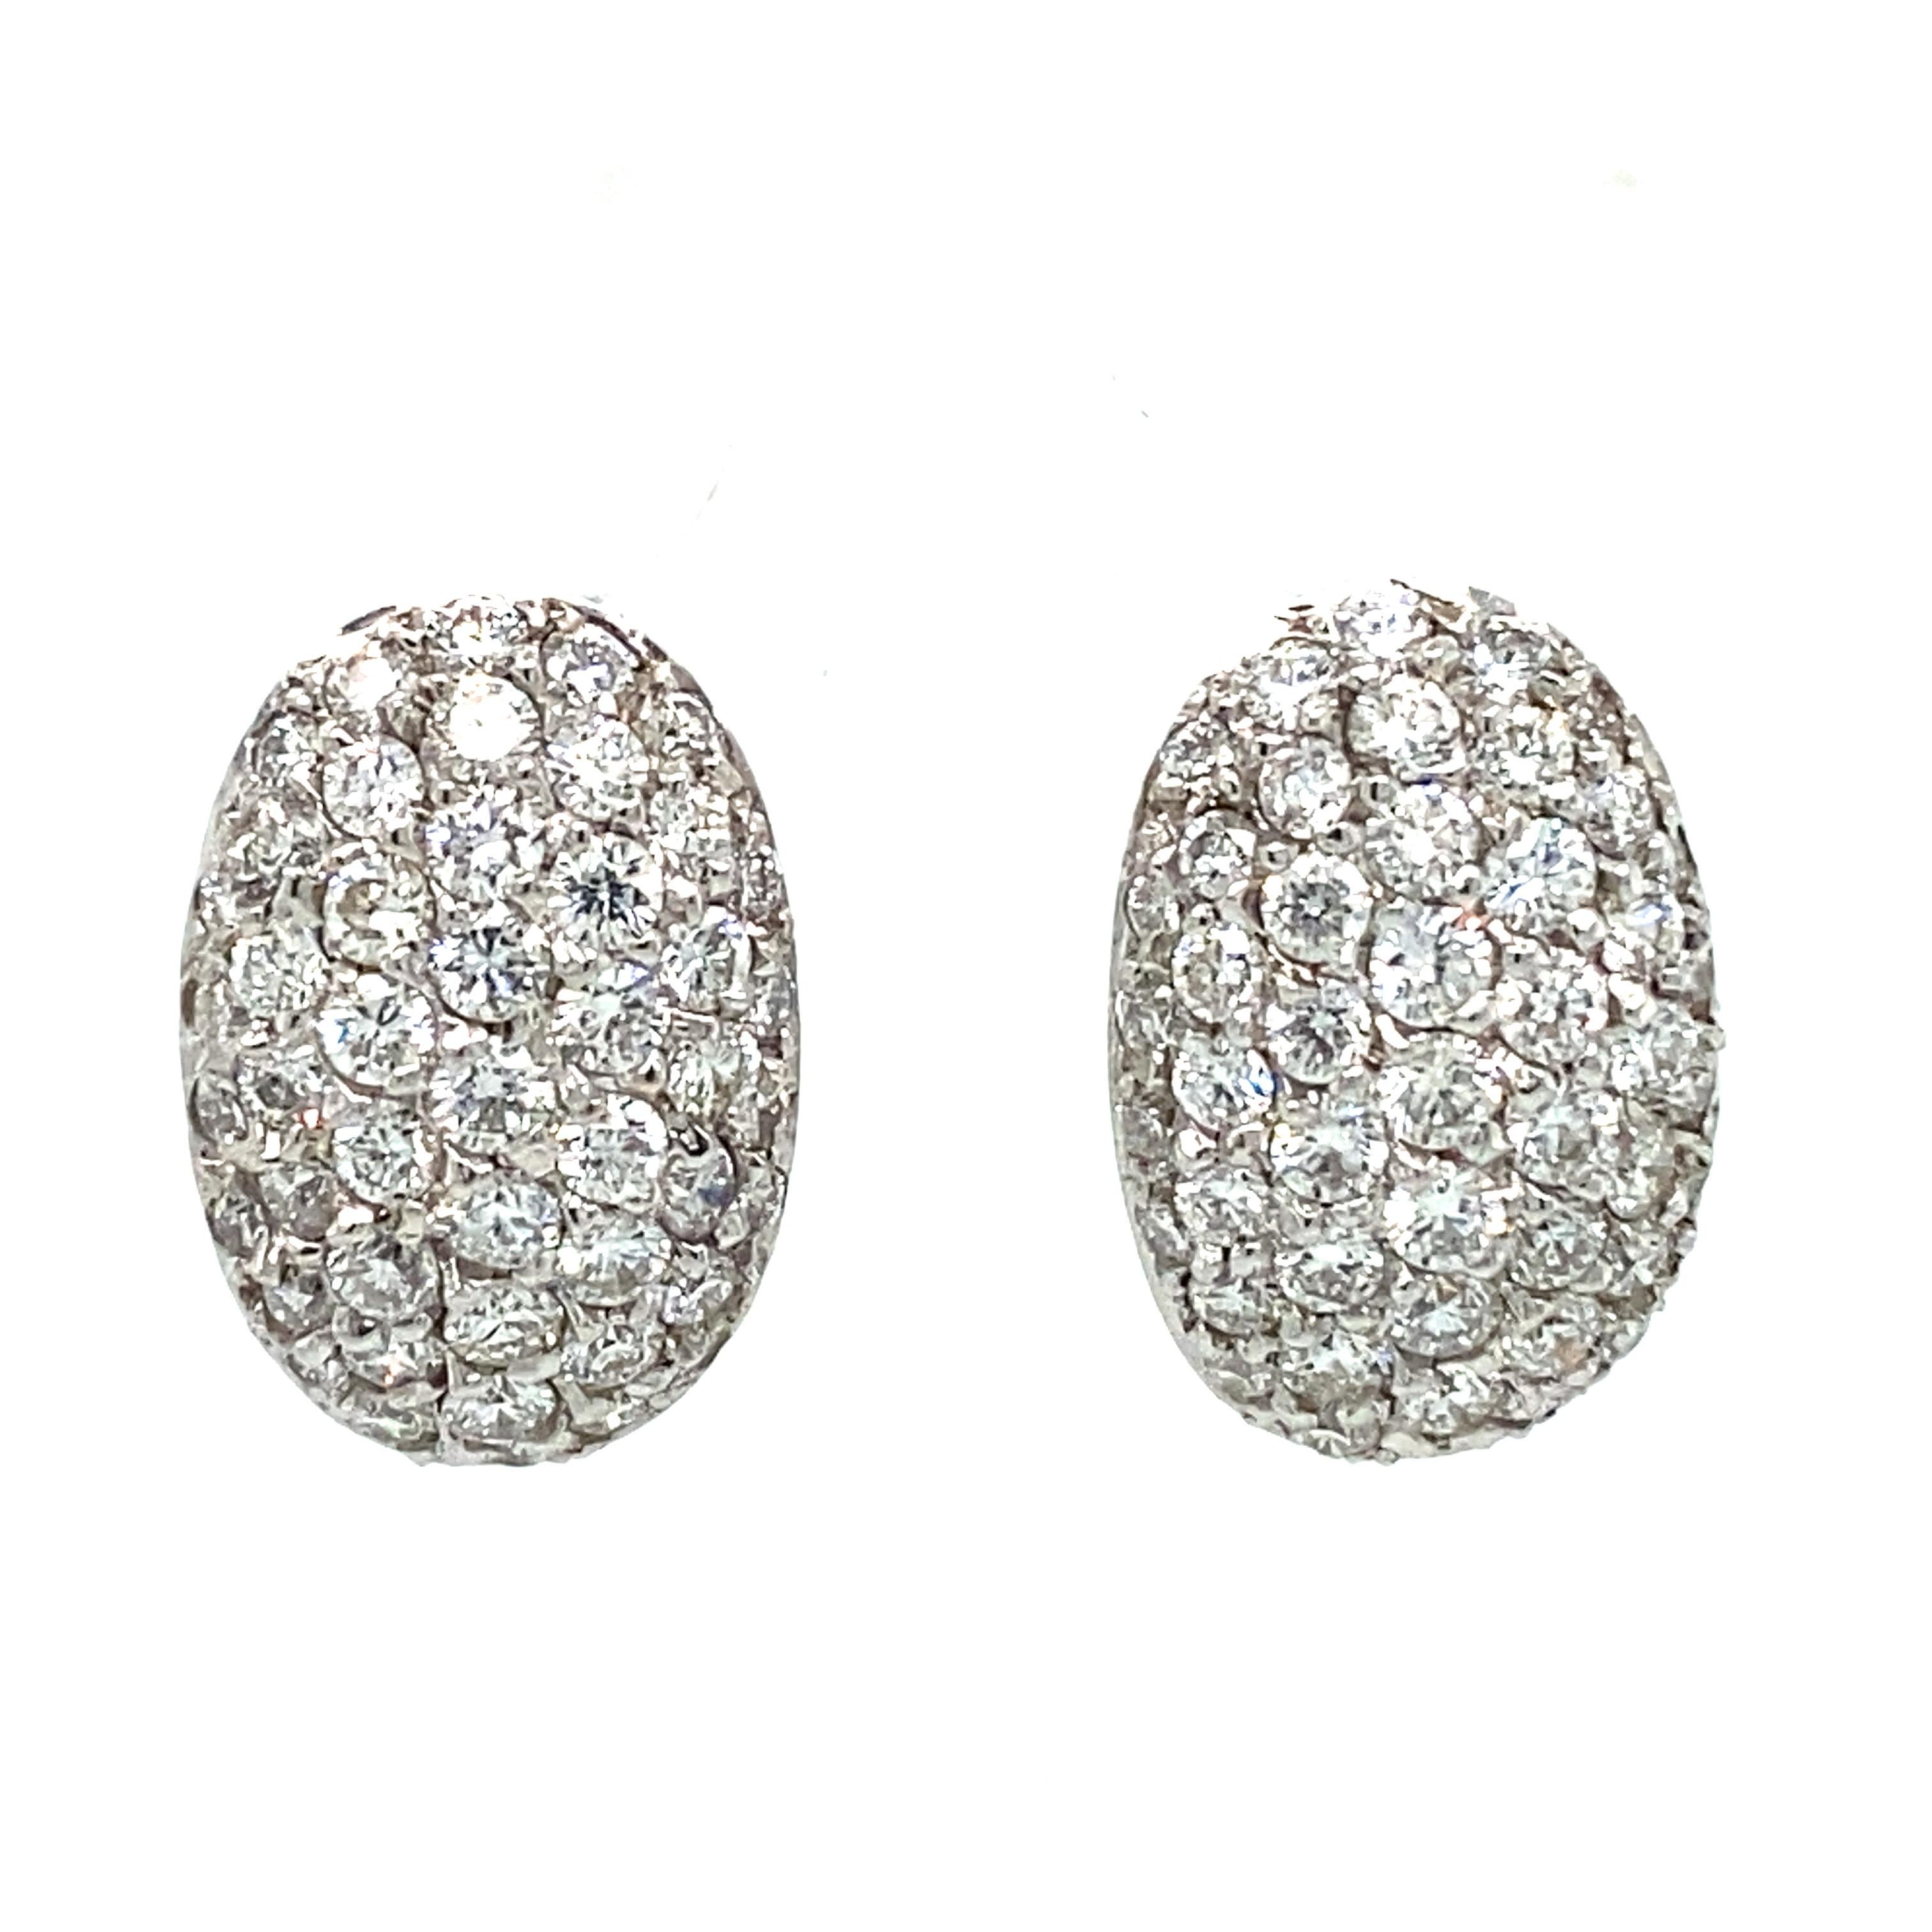 Item Details: This pair of earrings by Tiffany & Co. have pave diamonds totaling 4 carats. They are beautifully crafted with a detailed open back and omega clips. 

Circa: 1990s
Metal Type: 18 Karat White Gold
Weight: 8.0 grams
Size: 0.75 inch